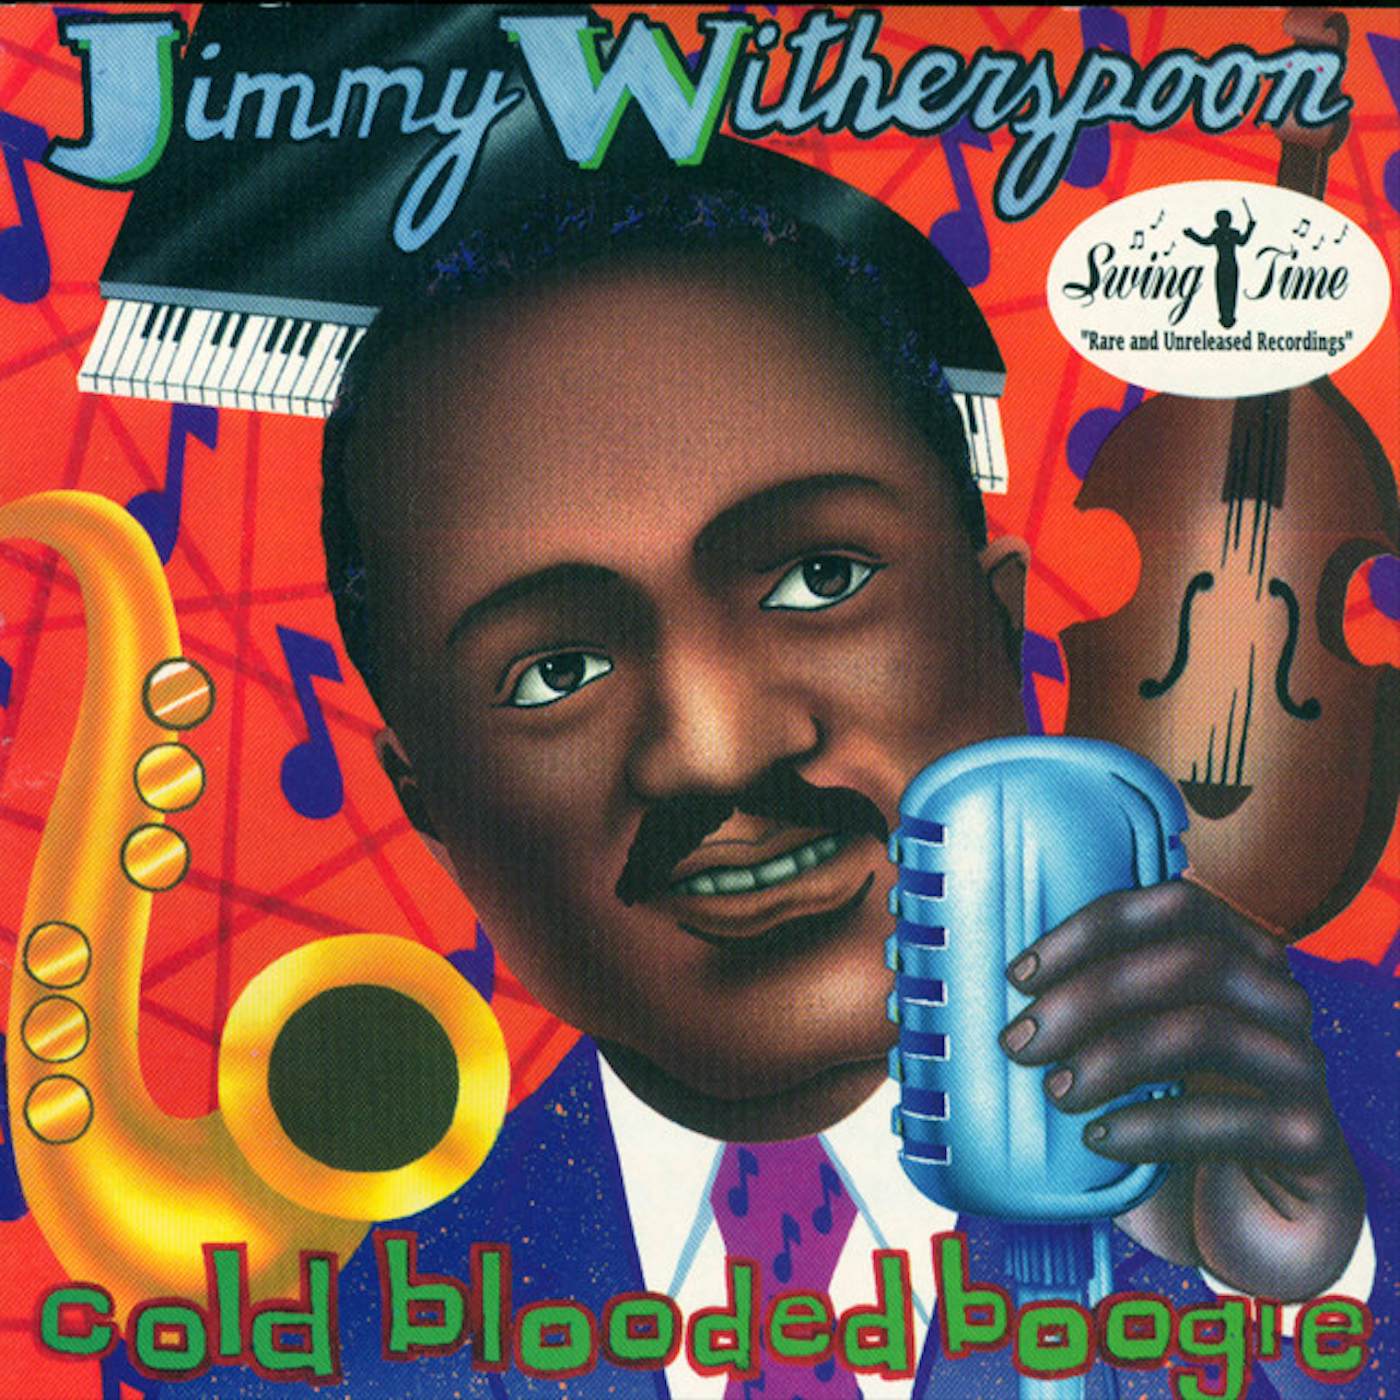 Jimmy Witherspoon Cold Blooded Boogie CD